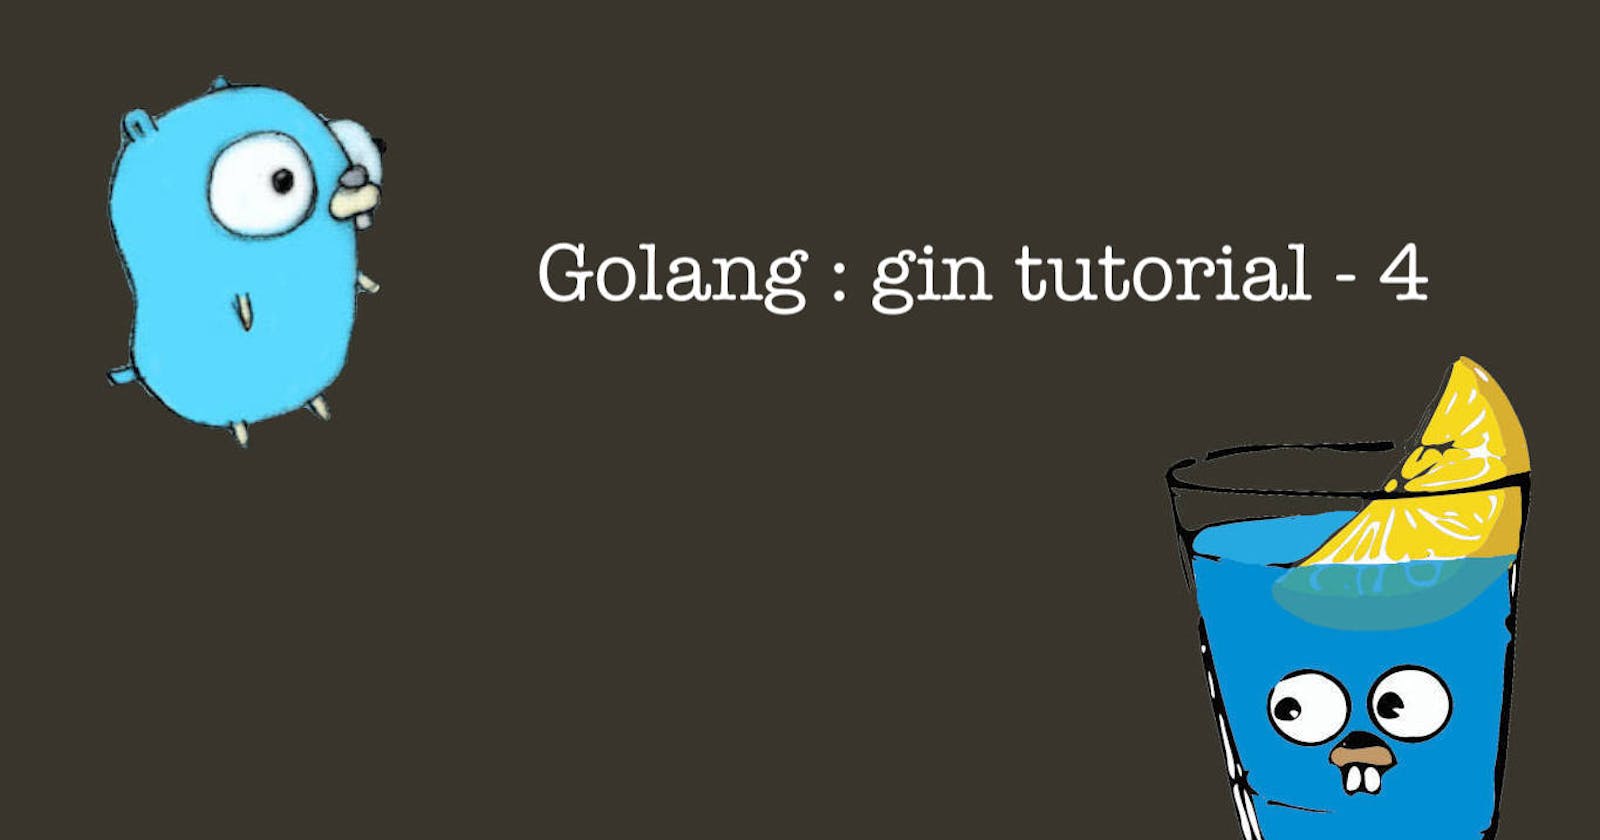 Golang : gin tutorial - 4 (Create a multipart/form-data POST request)